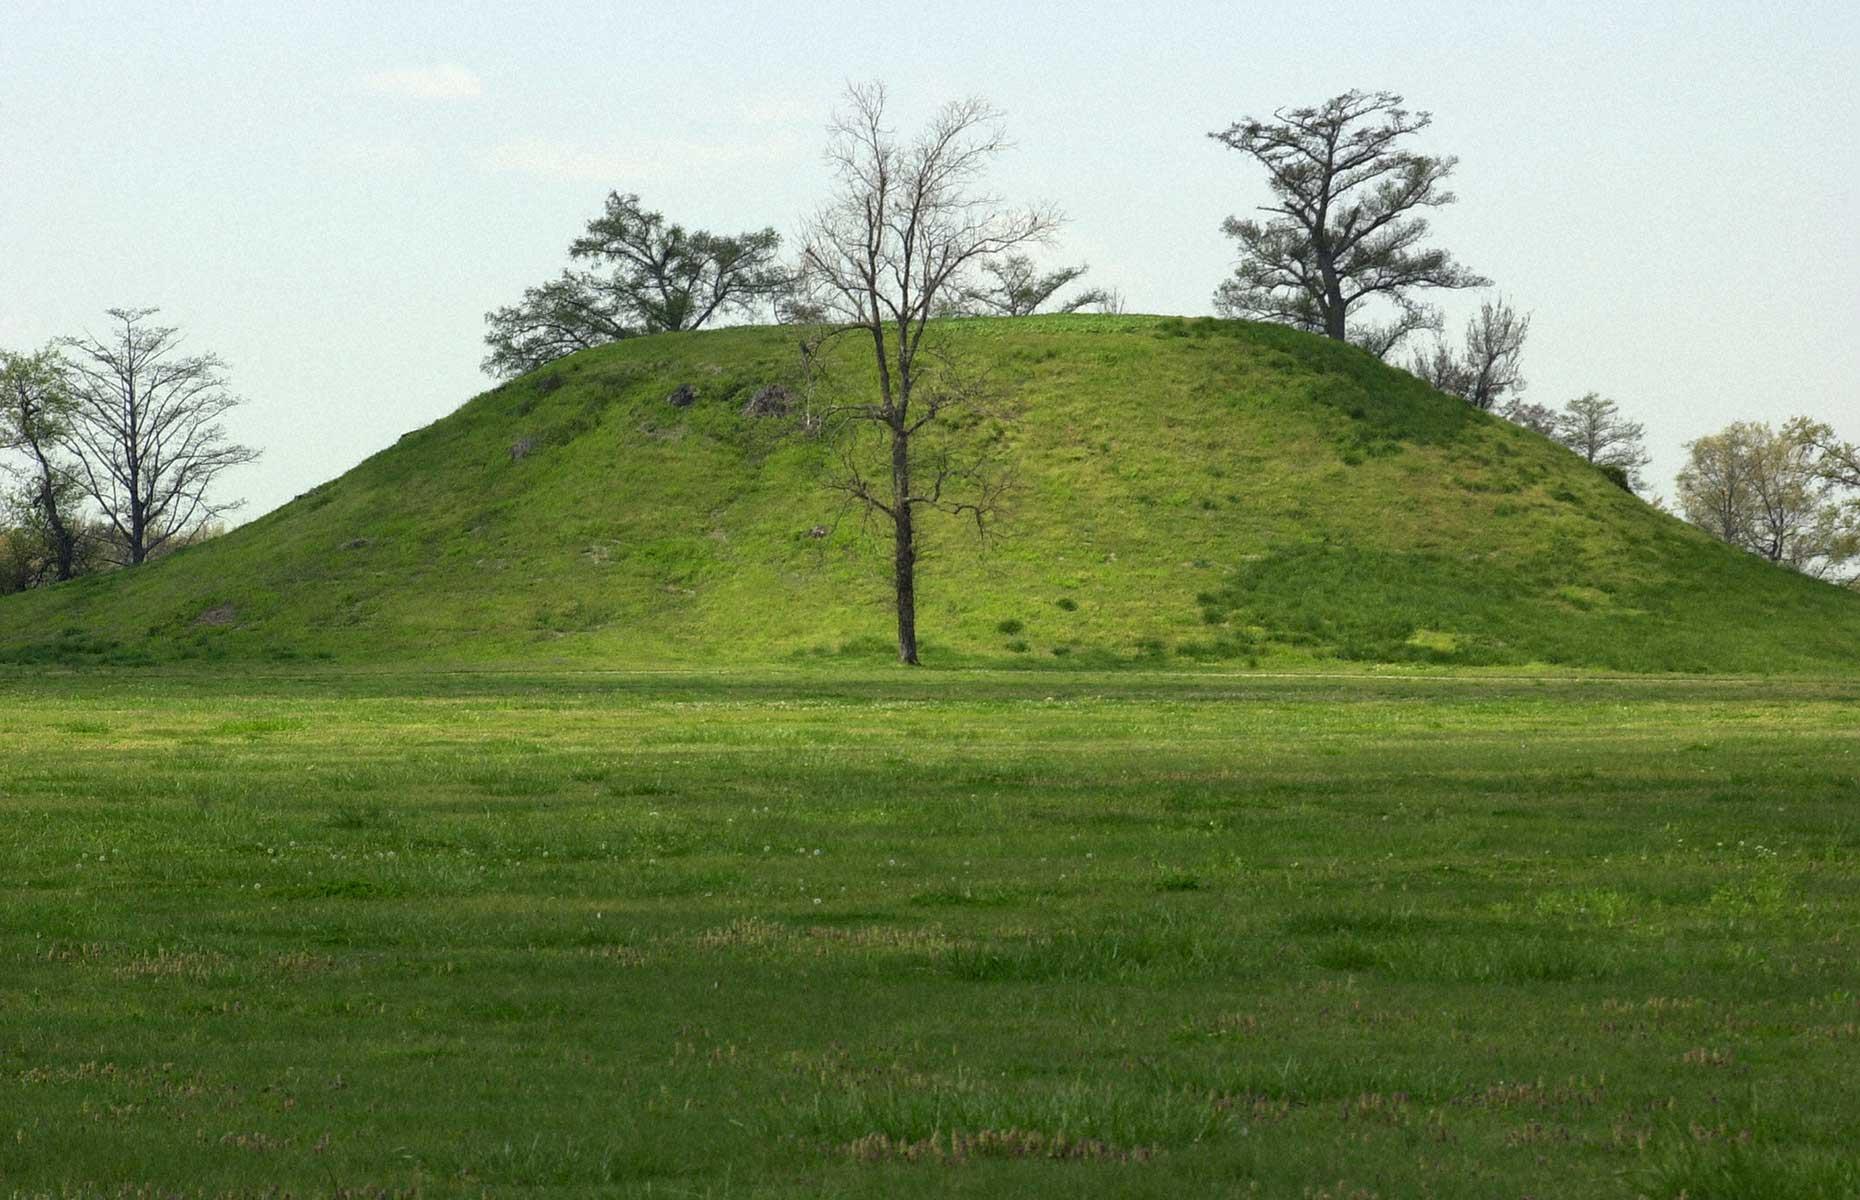 <p>The <a href="https://www.arkansasstateparks.com/parks/plum-bayou-mounds-archeological-state-park">Plum Bayou Mounds</a> are what remains of a large, ceremonial complex. One of the mounds stands at about 48 feet (14.6m), making it the tallest Native American mound in Arkansas. These earthen mounds were inhabited between <a href="https://www.onlyinyourstate.com/arkansas/ar-archaeology/">AD 650 and 1050</a> and you can explore them for yourself on a guided tour (booking recommended). The Plum Bayou Mounds Archeological State Park is just a short drive from Little Rock.</p>